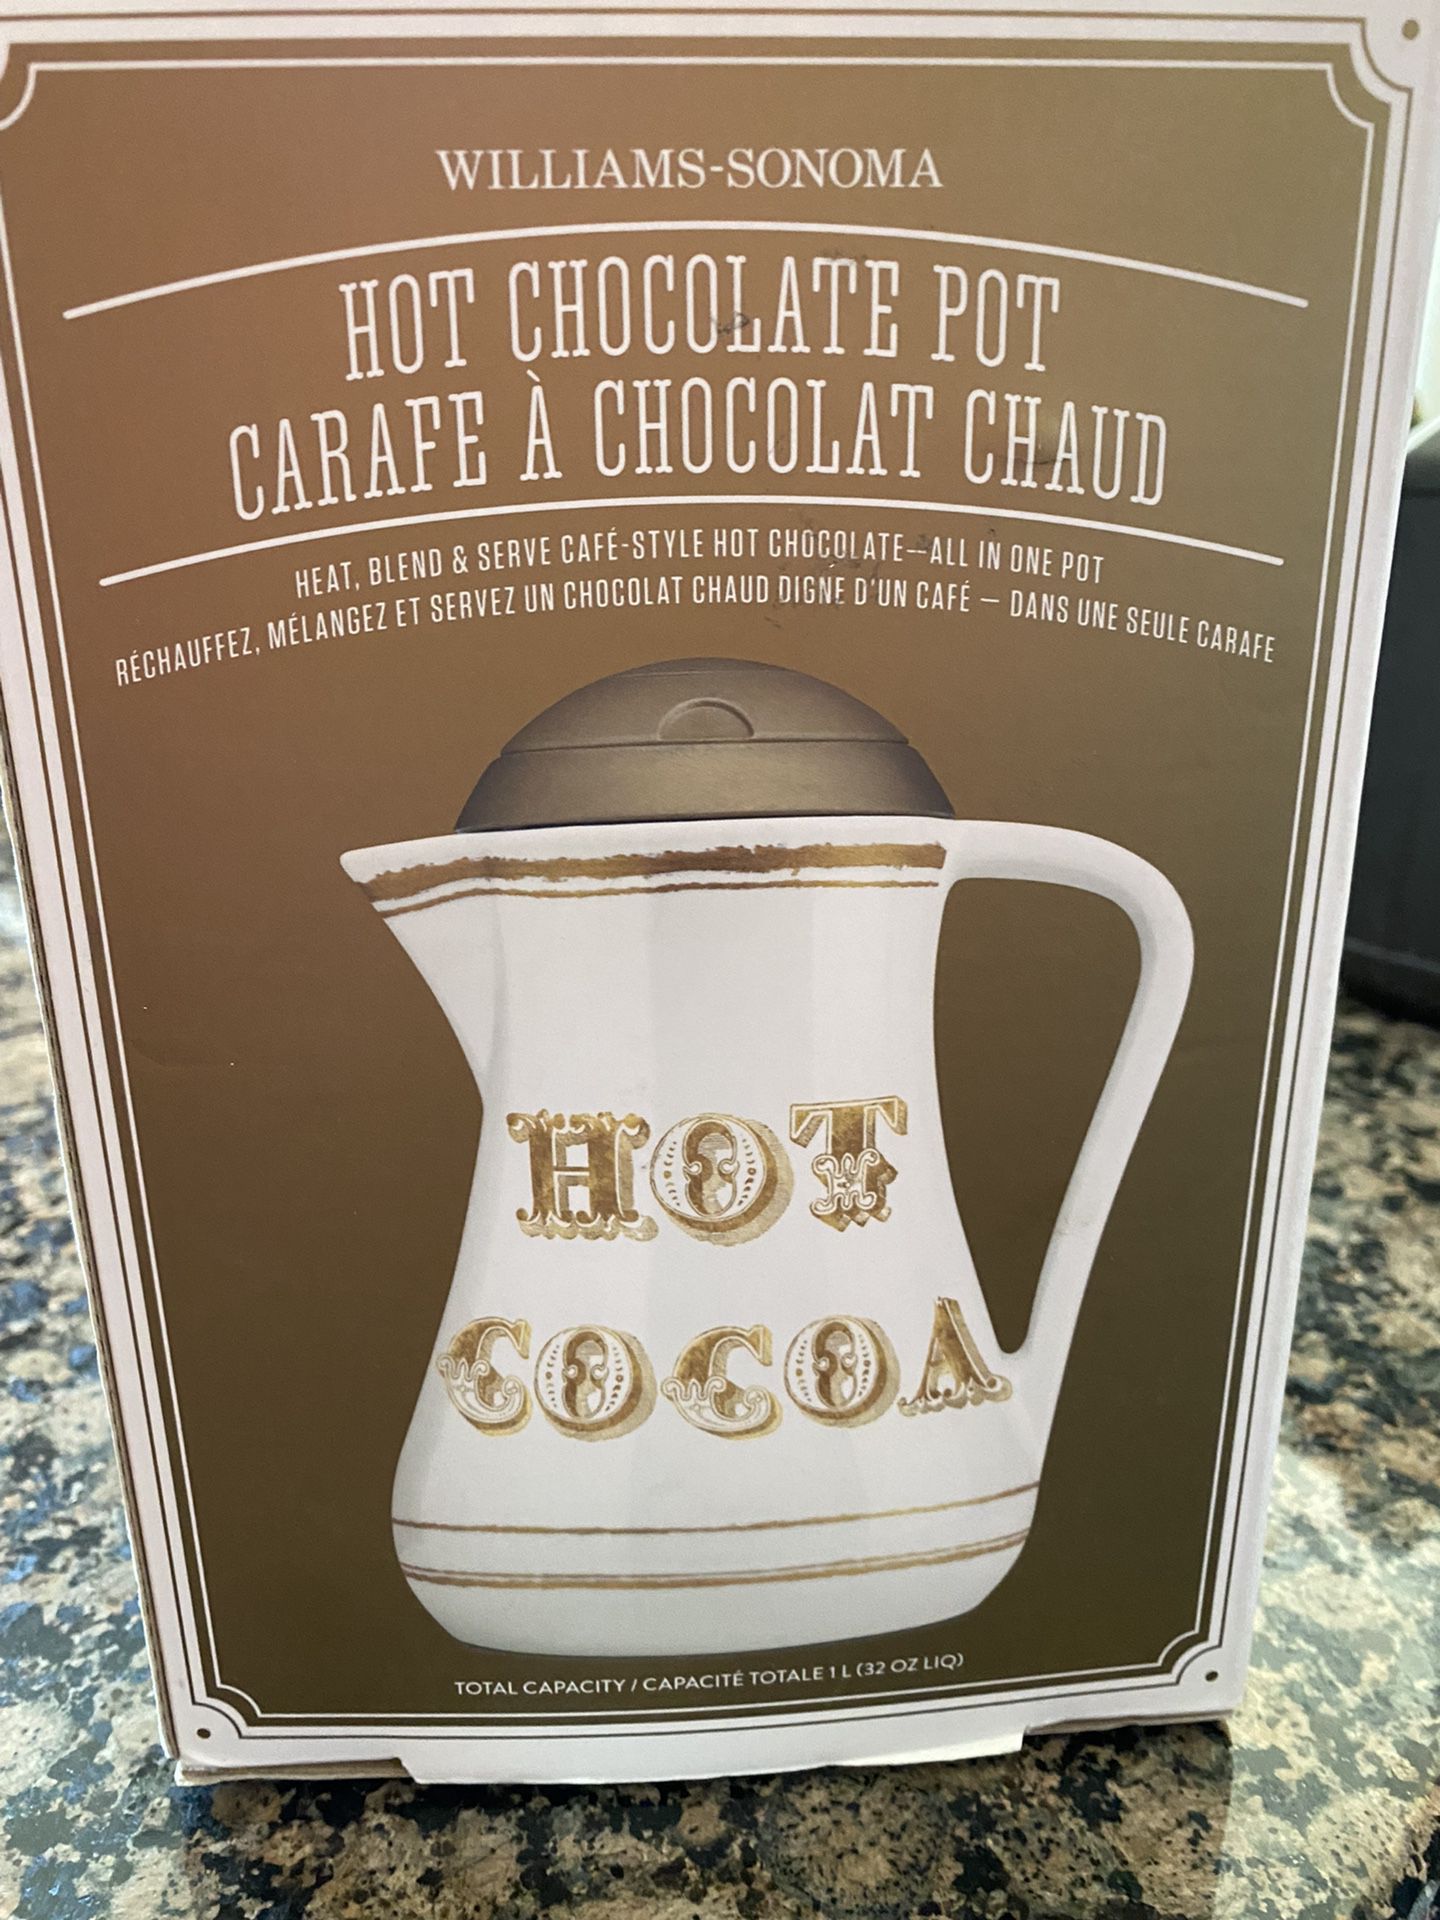 Williams-Sonoma Hot Chocolate Pot Carafe 32 oz Heat Blend Serve All In One  for Sale in Merced, CA - OfferUp